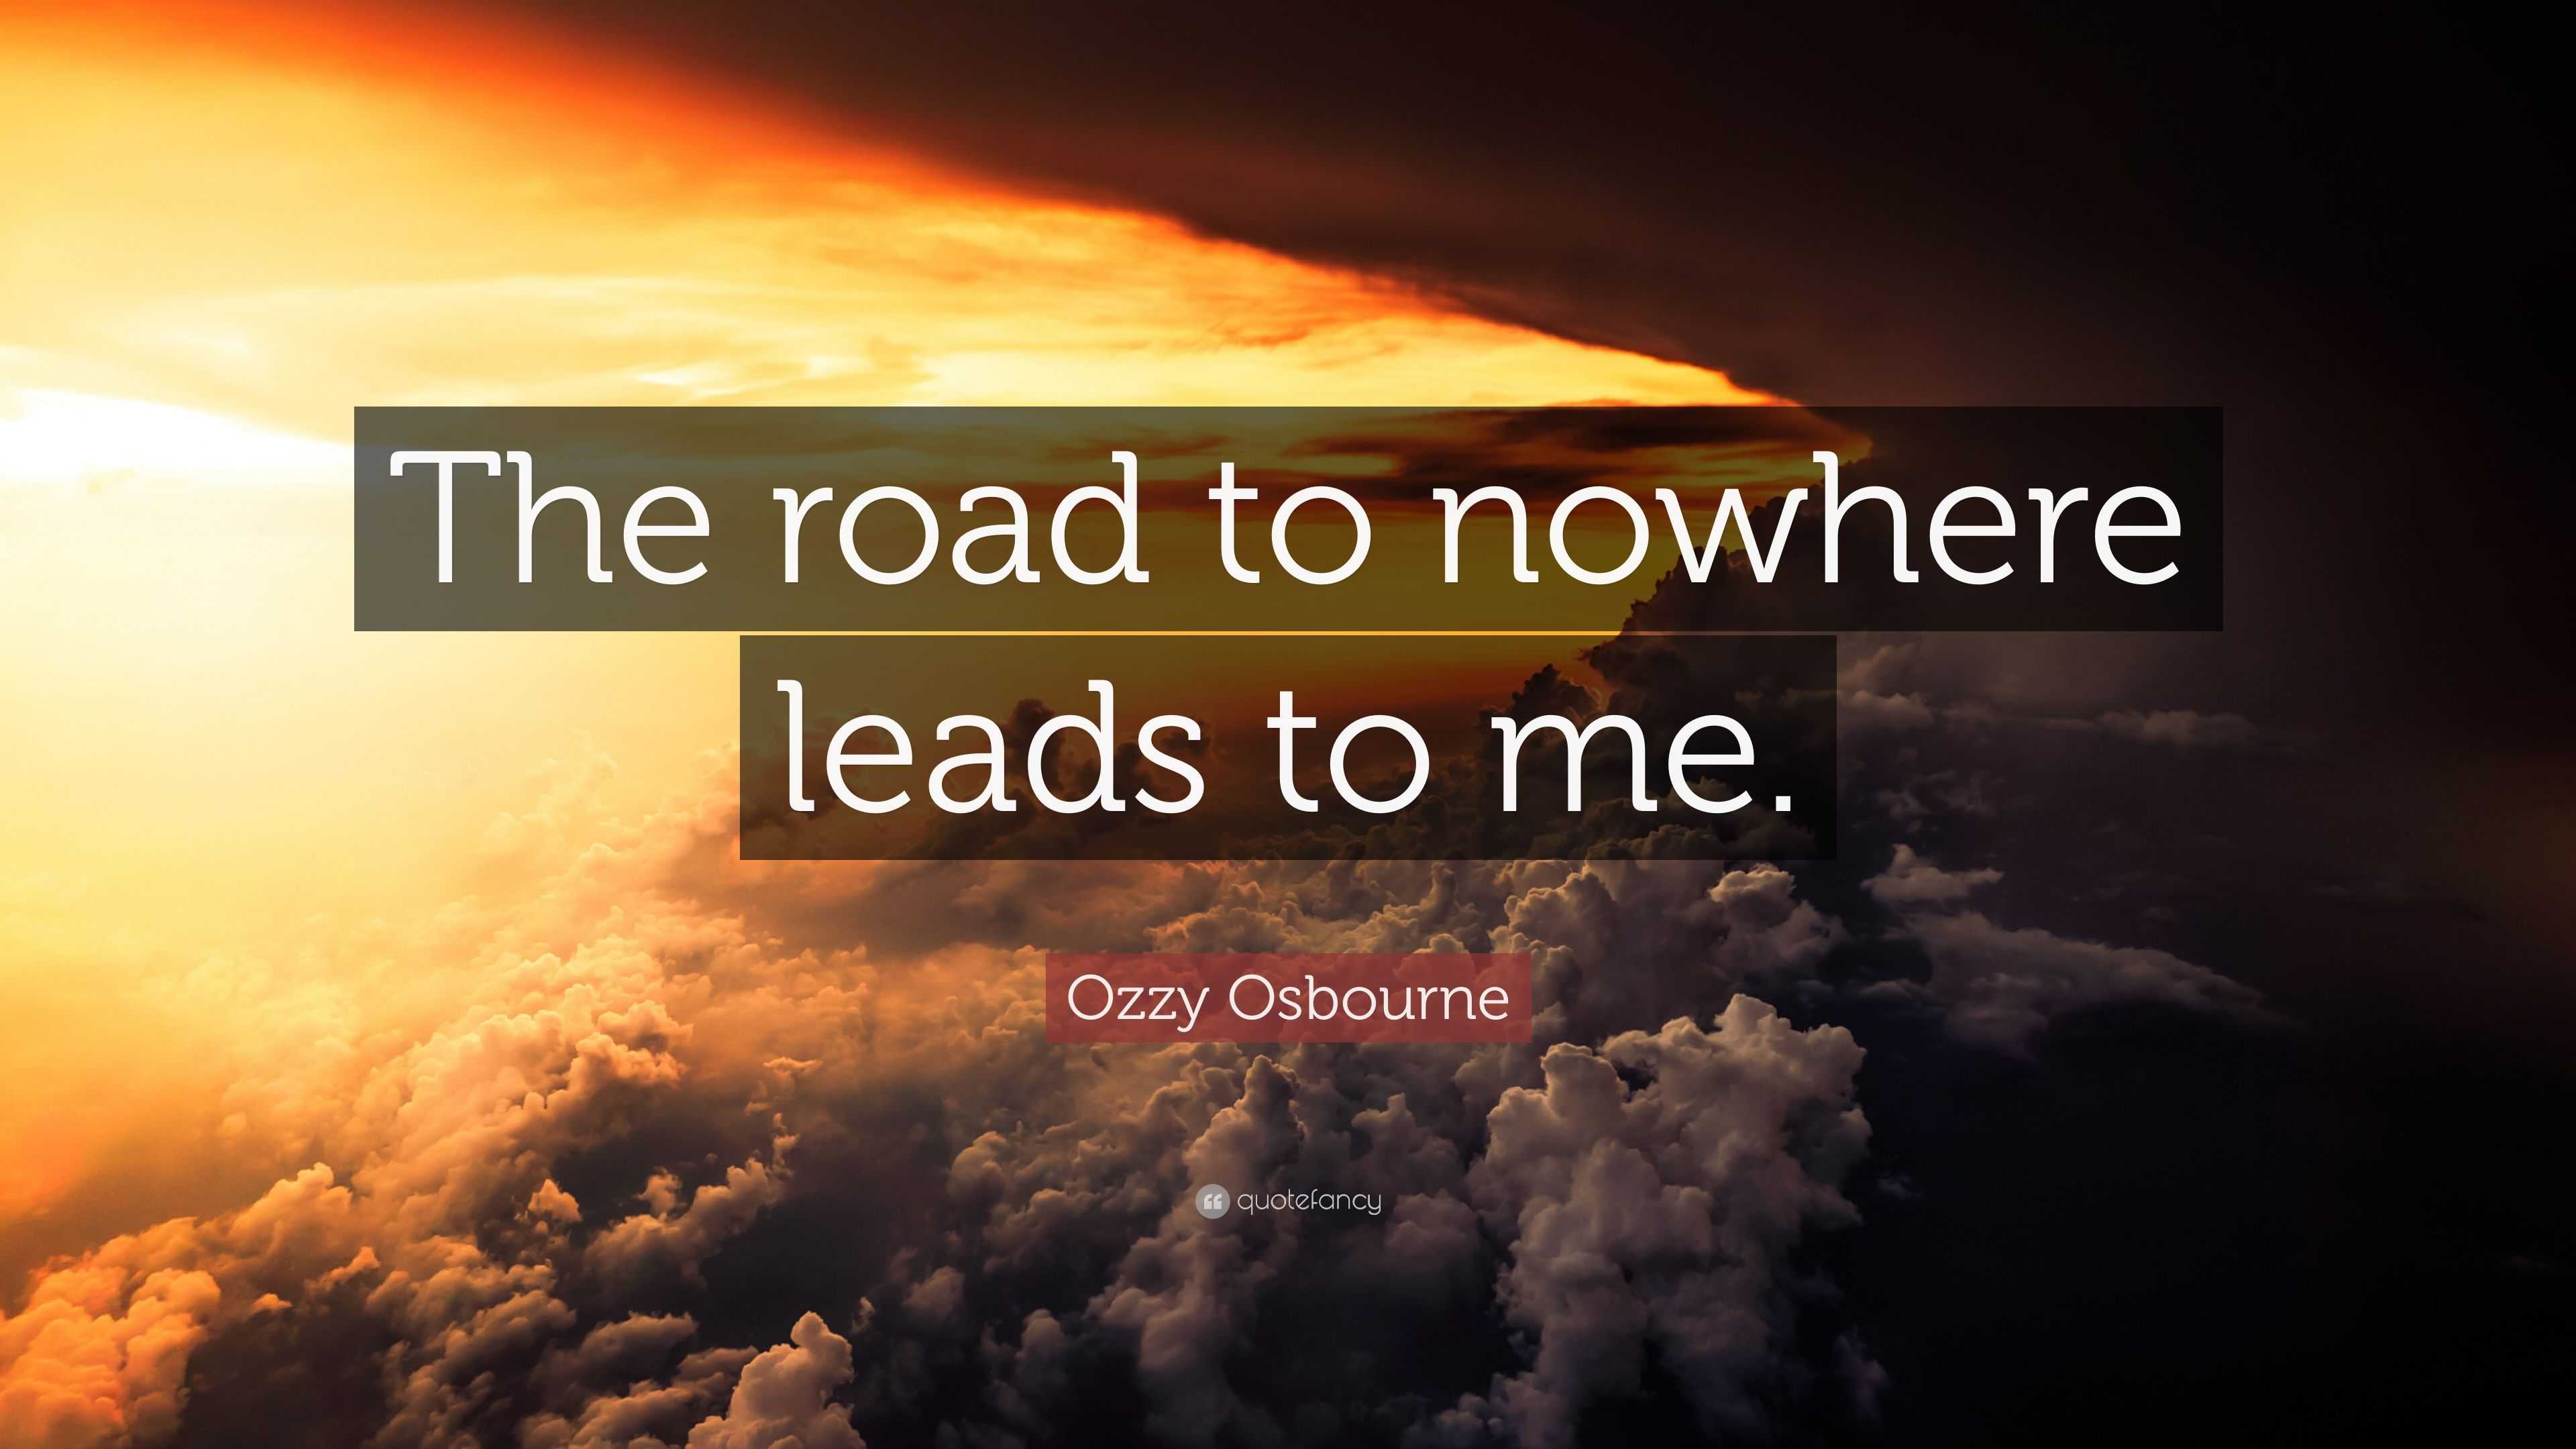 ozzy osbourne the road to nowhere video